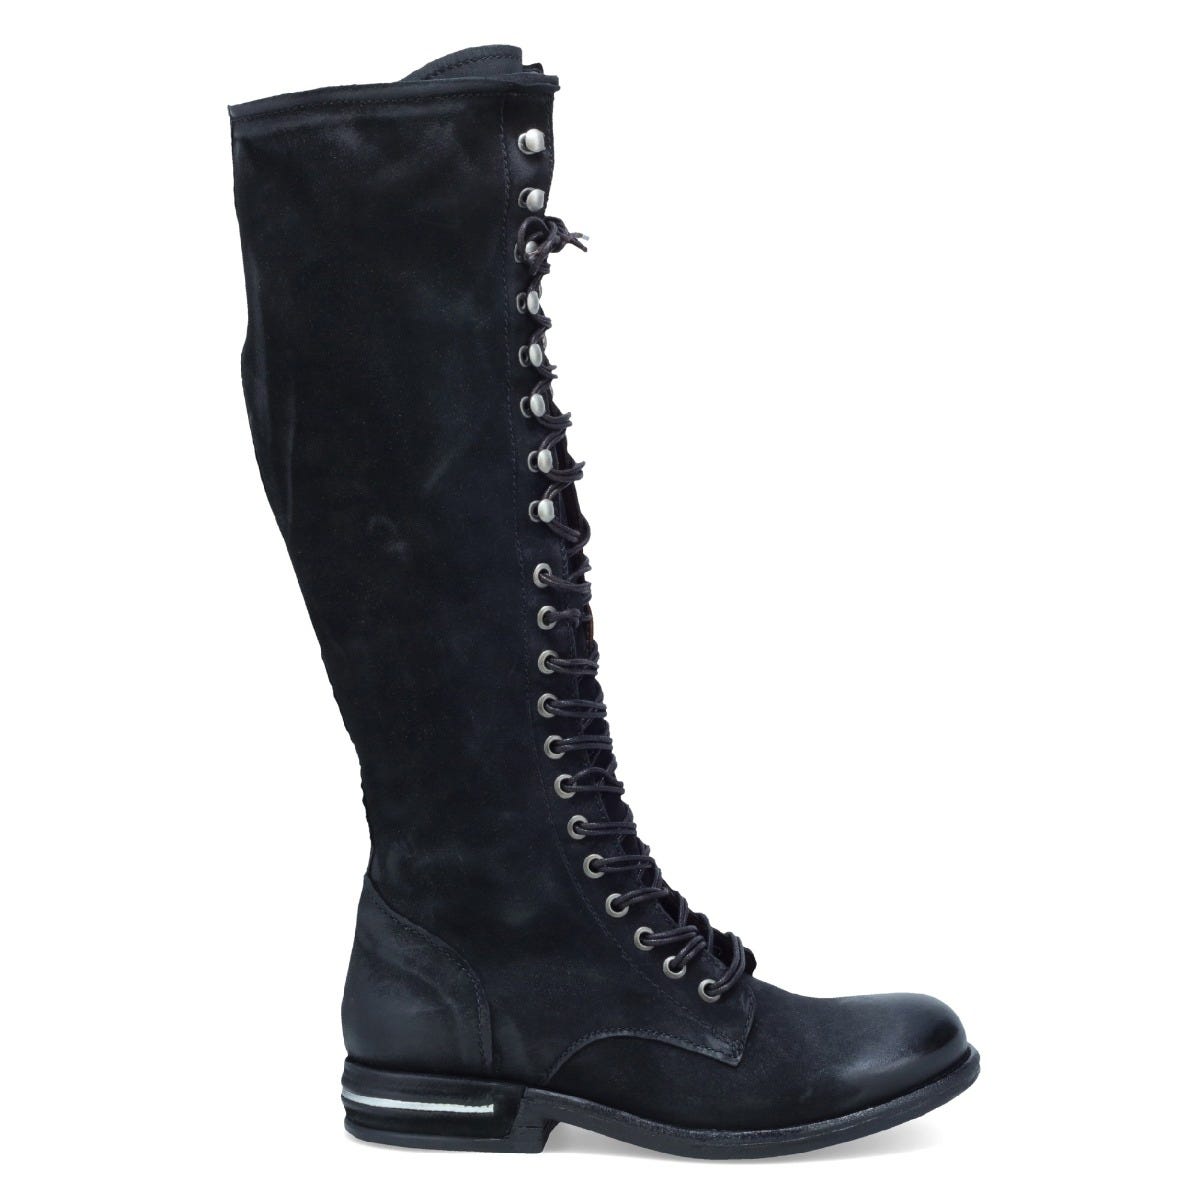 Outer side view of the a.s.98 trillie tall boot in black. This flat knee-high leather boot has a lace up front and a silver line in the heel. 